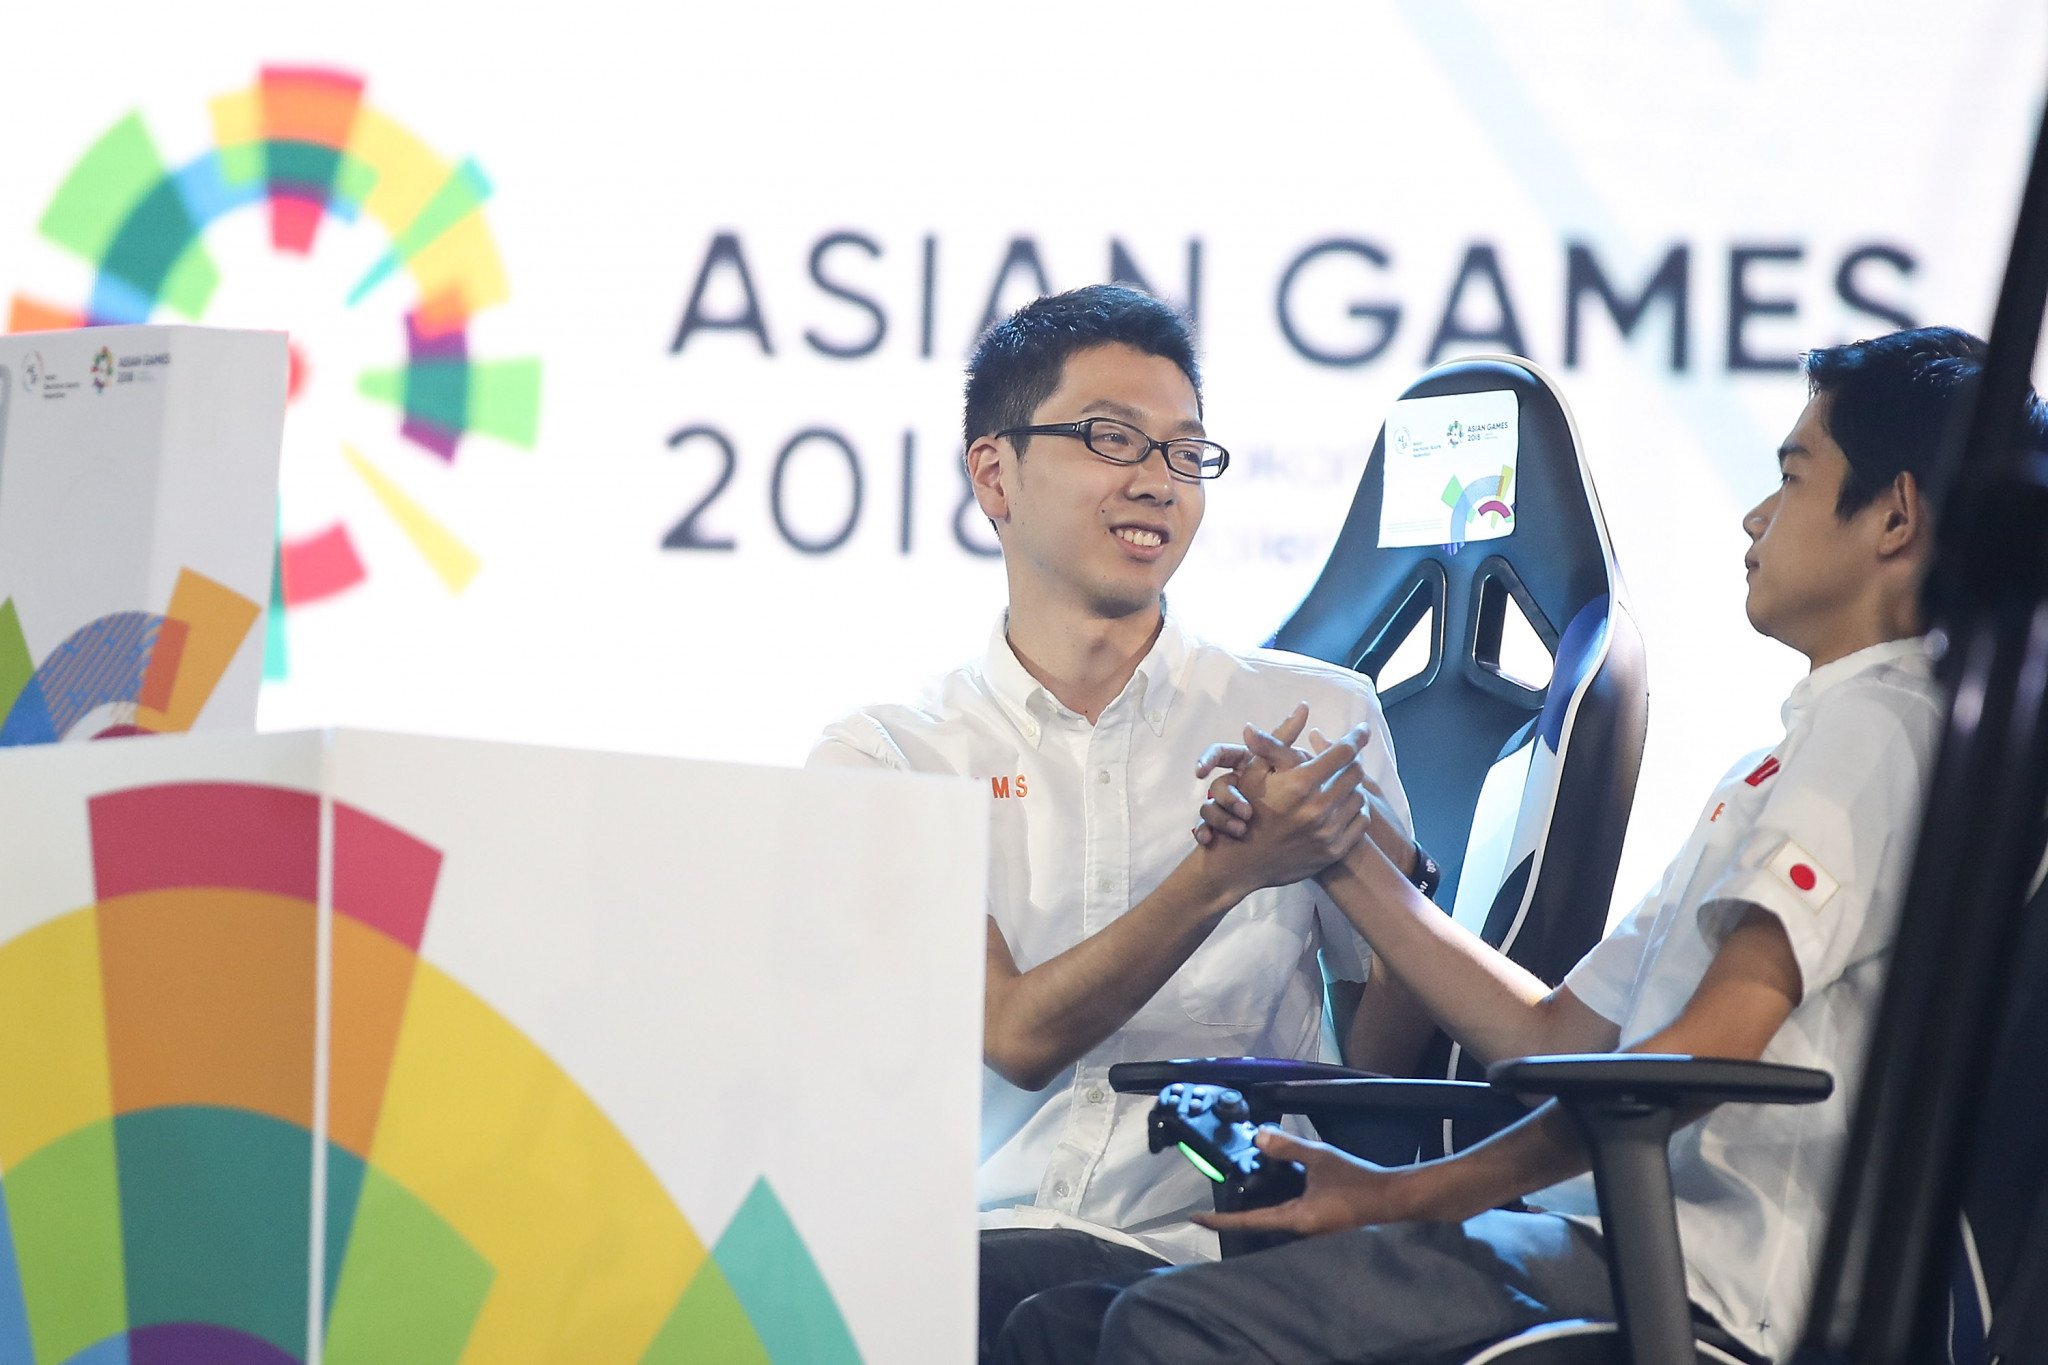 Esports featured as a demonstration event at the Jakarta Palembang 2018 Asian Games ©Getty Images